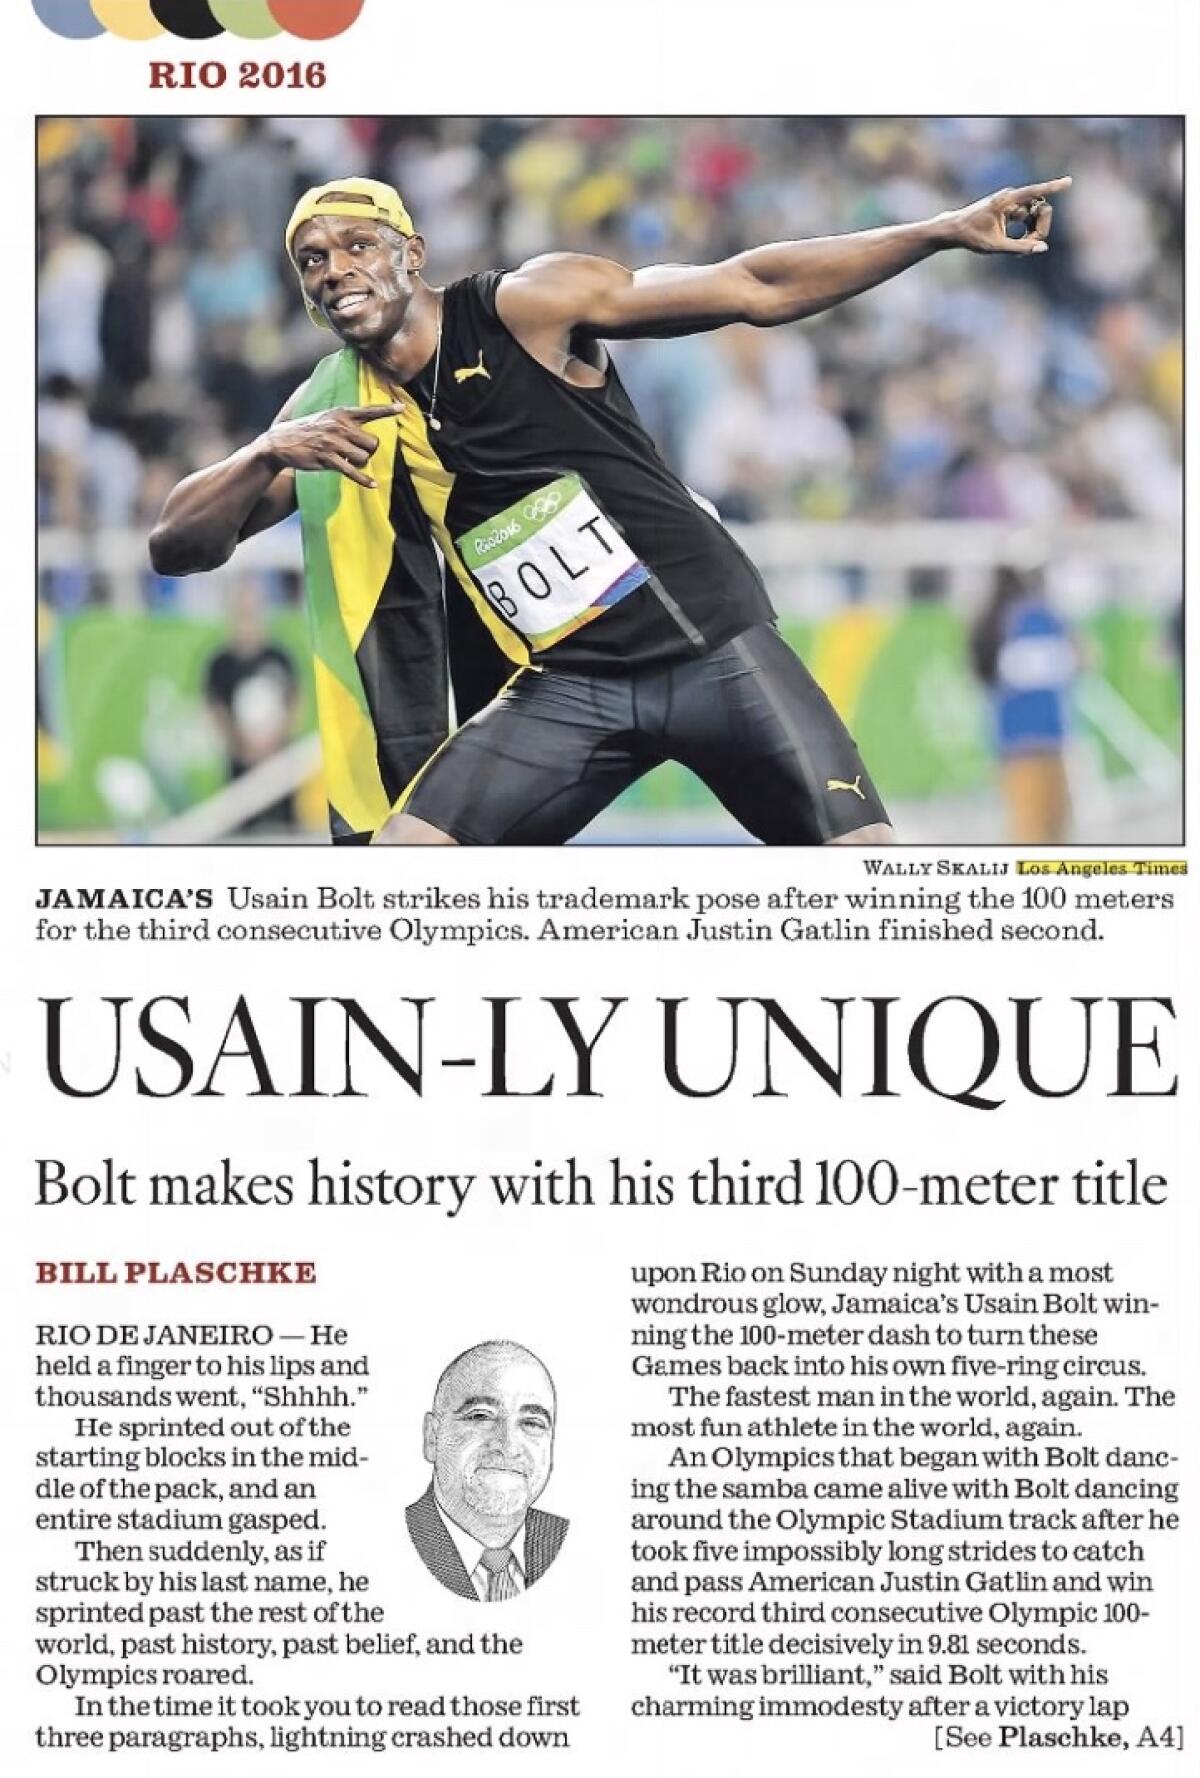 Bill Plaschke's front-page story about Usain Bolt's history-making 100-meter dash race at the 2016 Summer Olympics. 